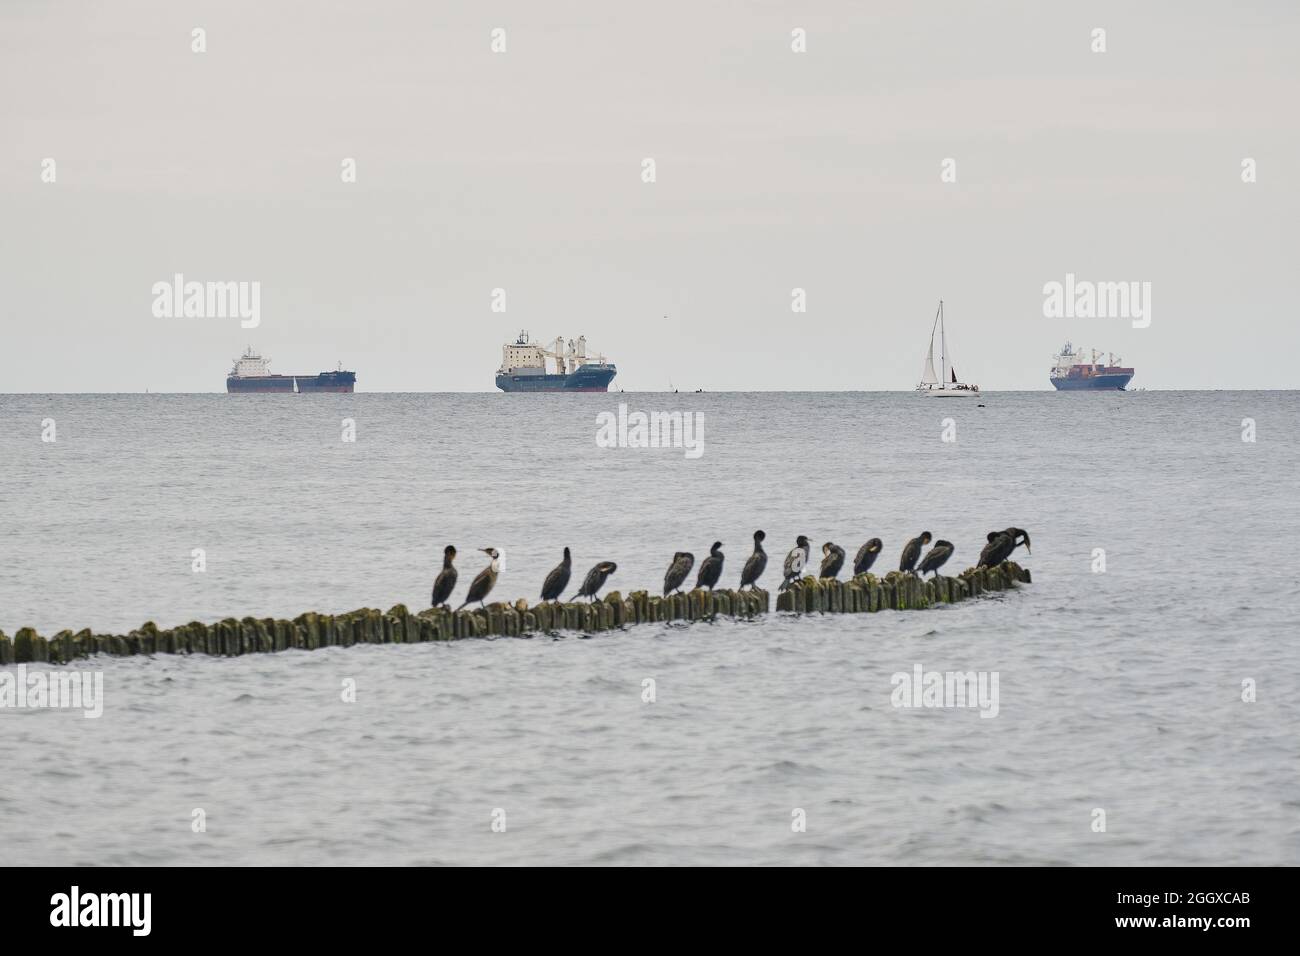 Seascape with cormorants on the breakwater, vessels in the background Stock Photo